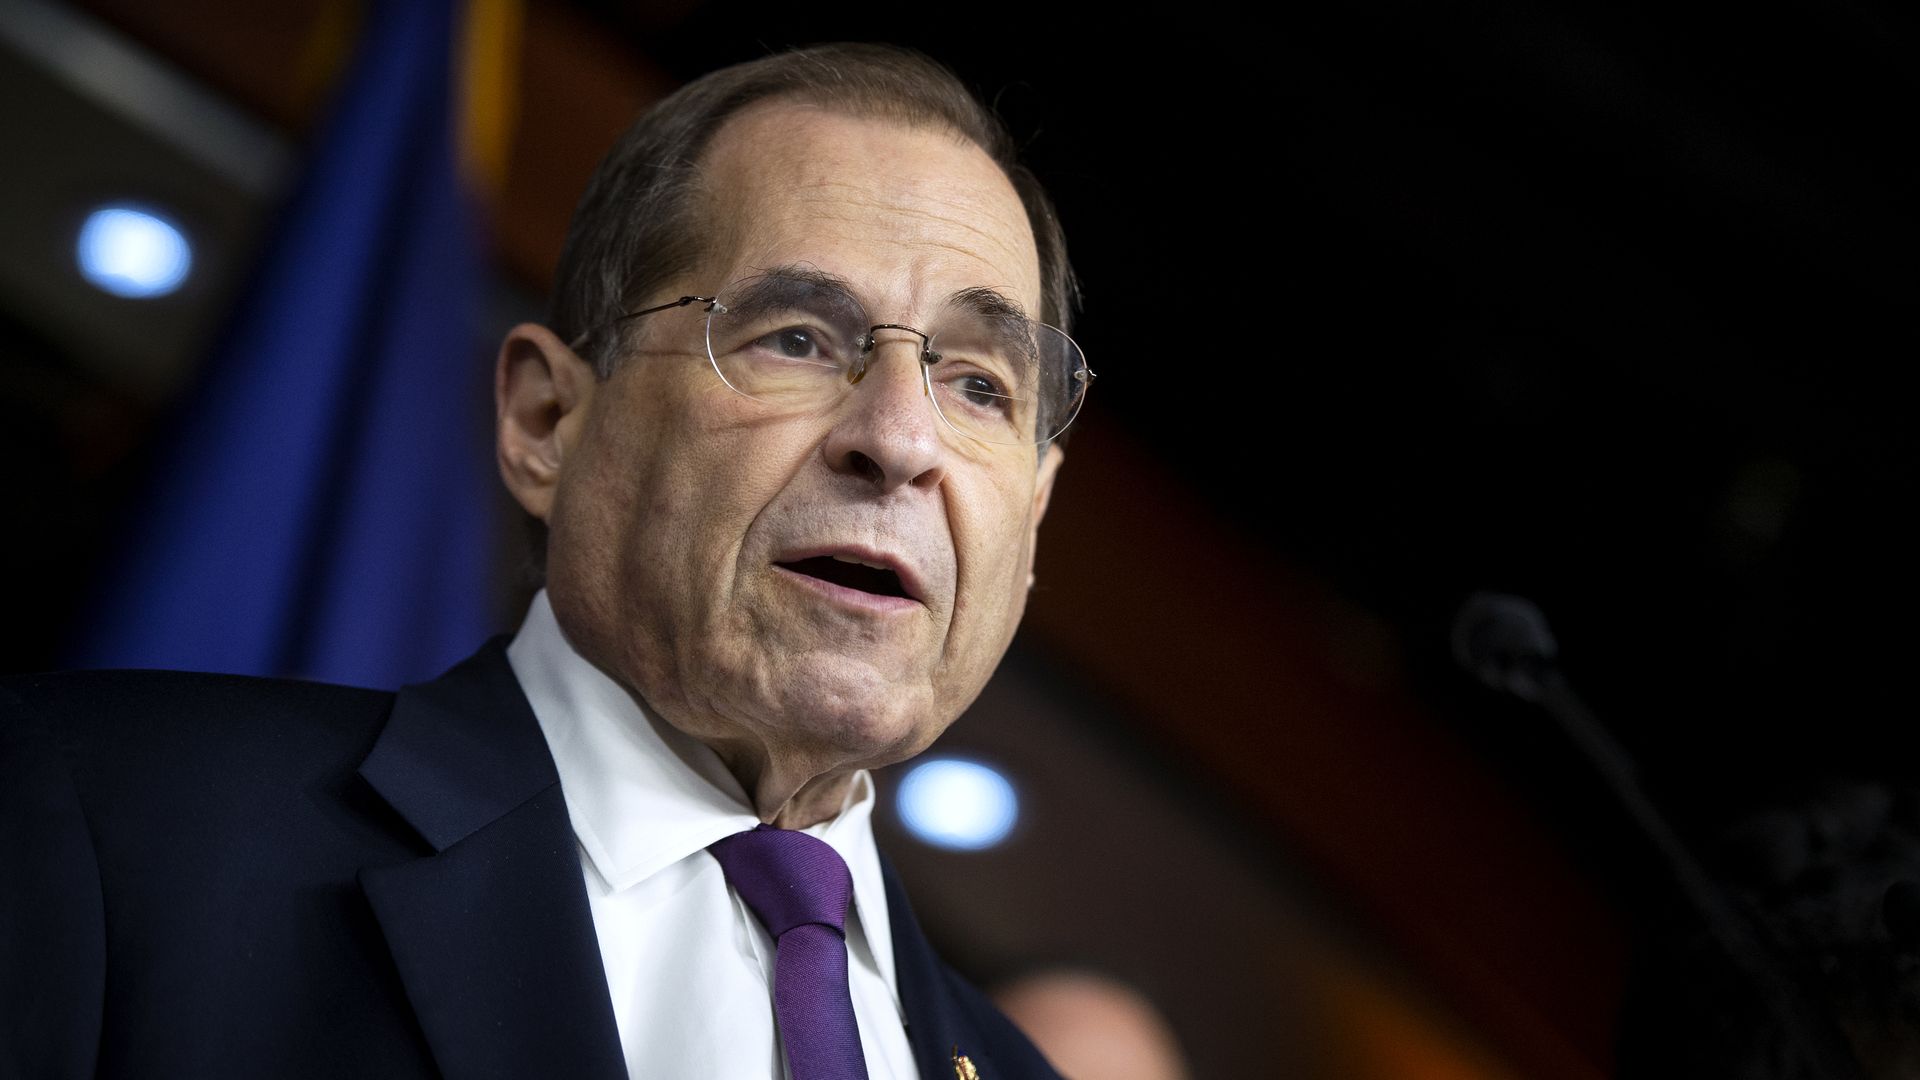 House Judiciary Committee Chairman Jerrold Nadler speaks to reporters on July 26, 2019.